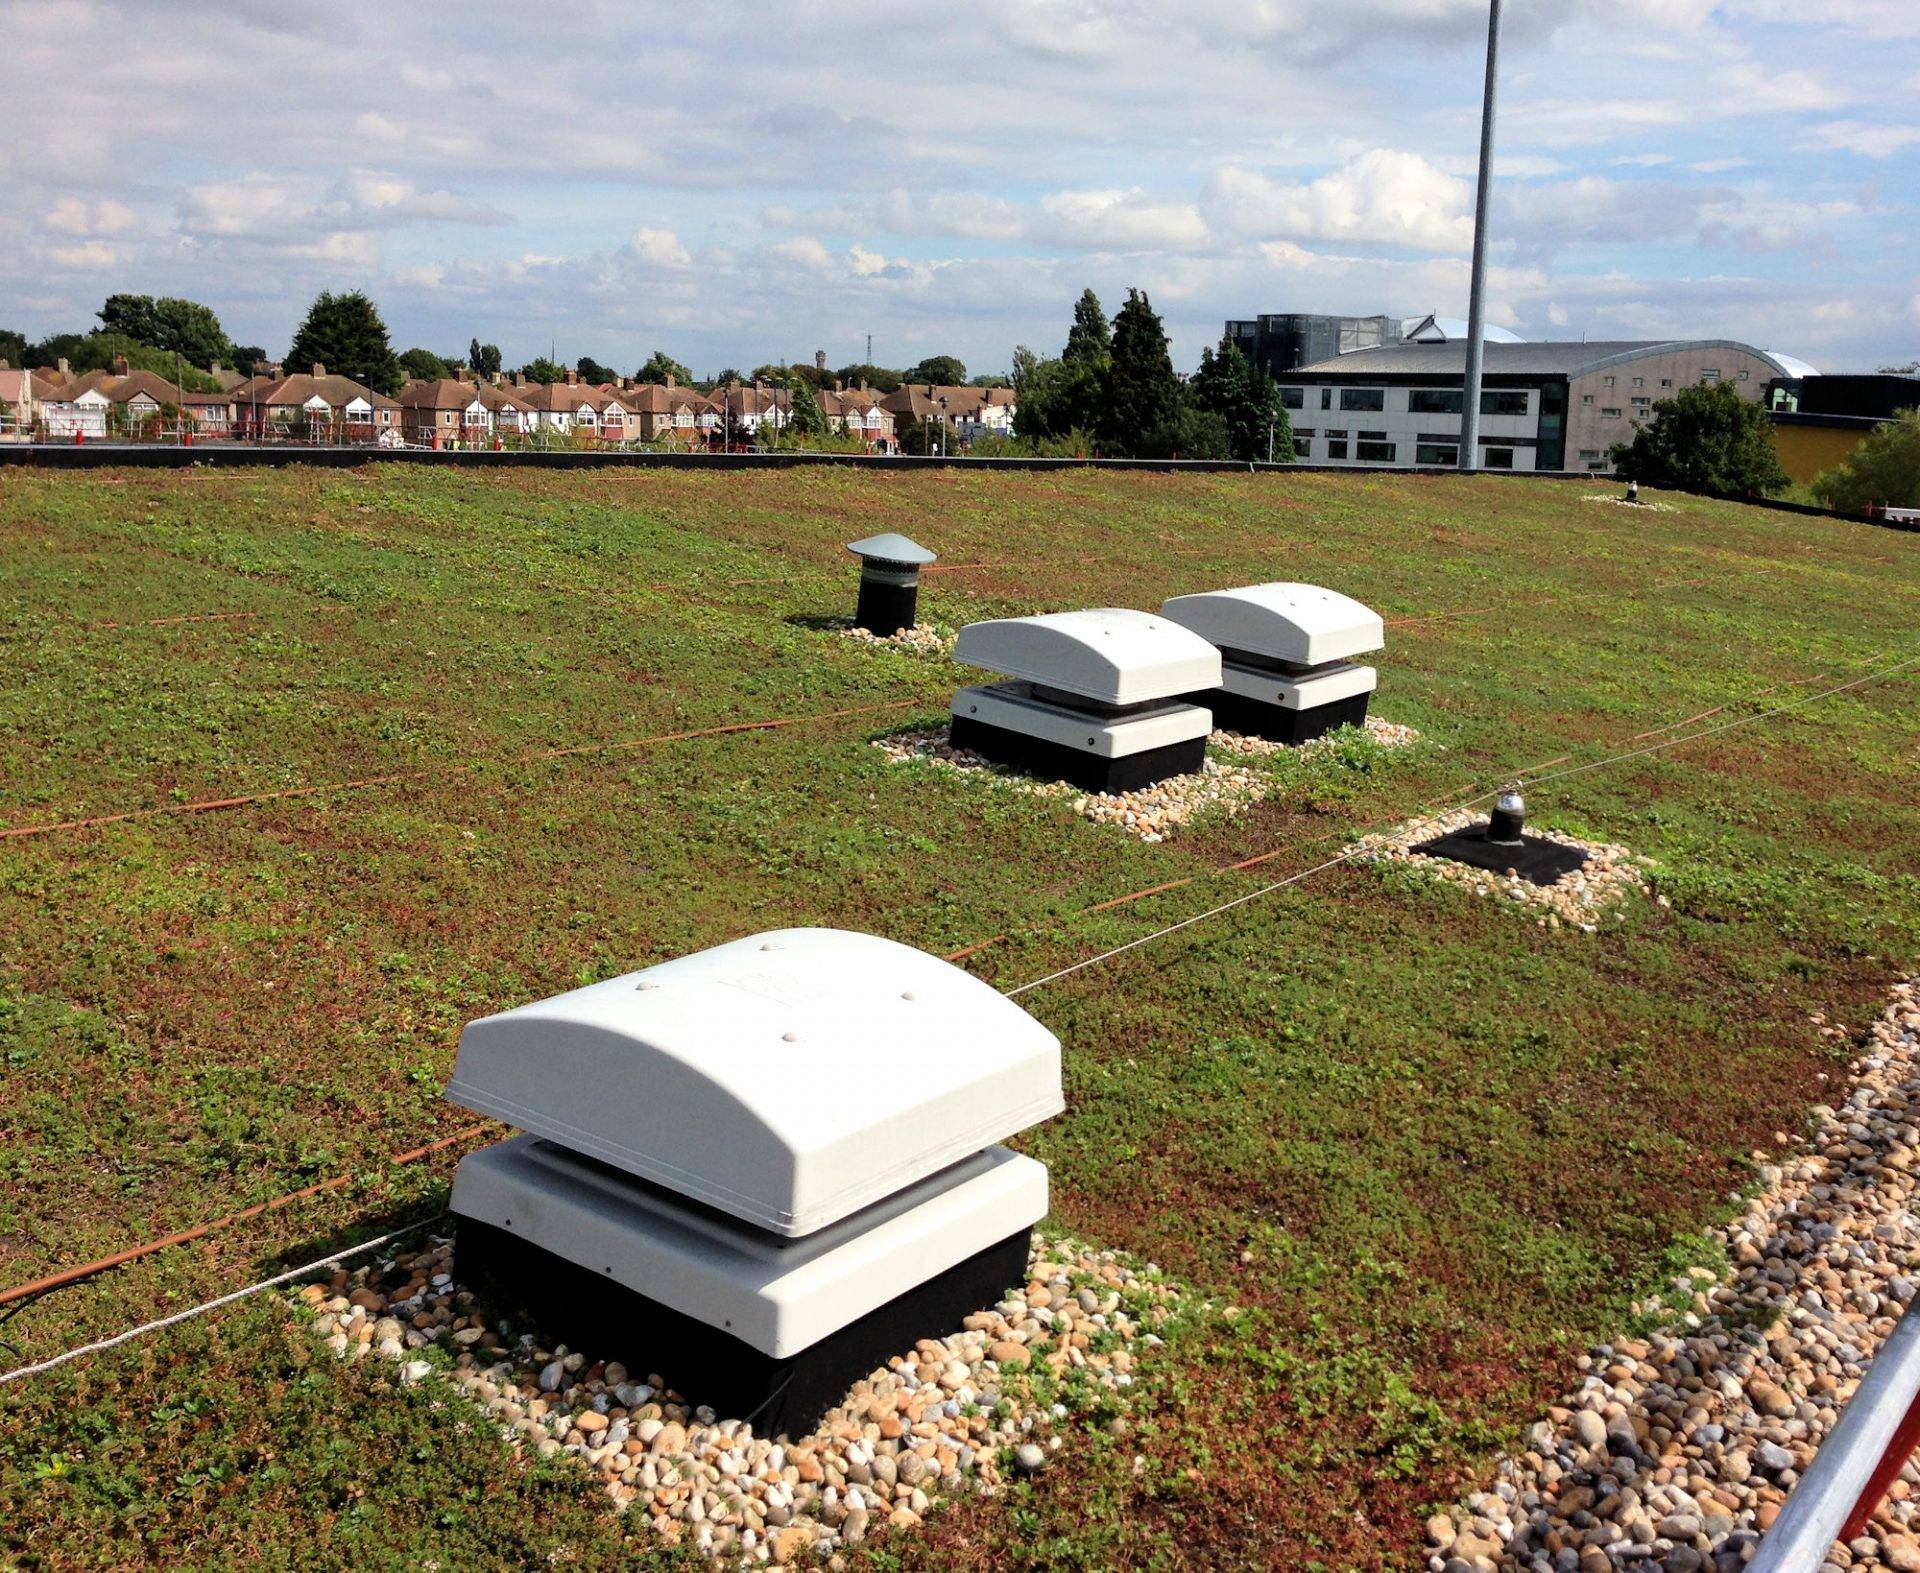 Extensive green roof watered by dripline irrigation system